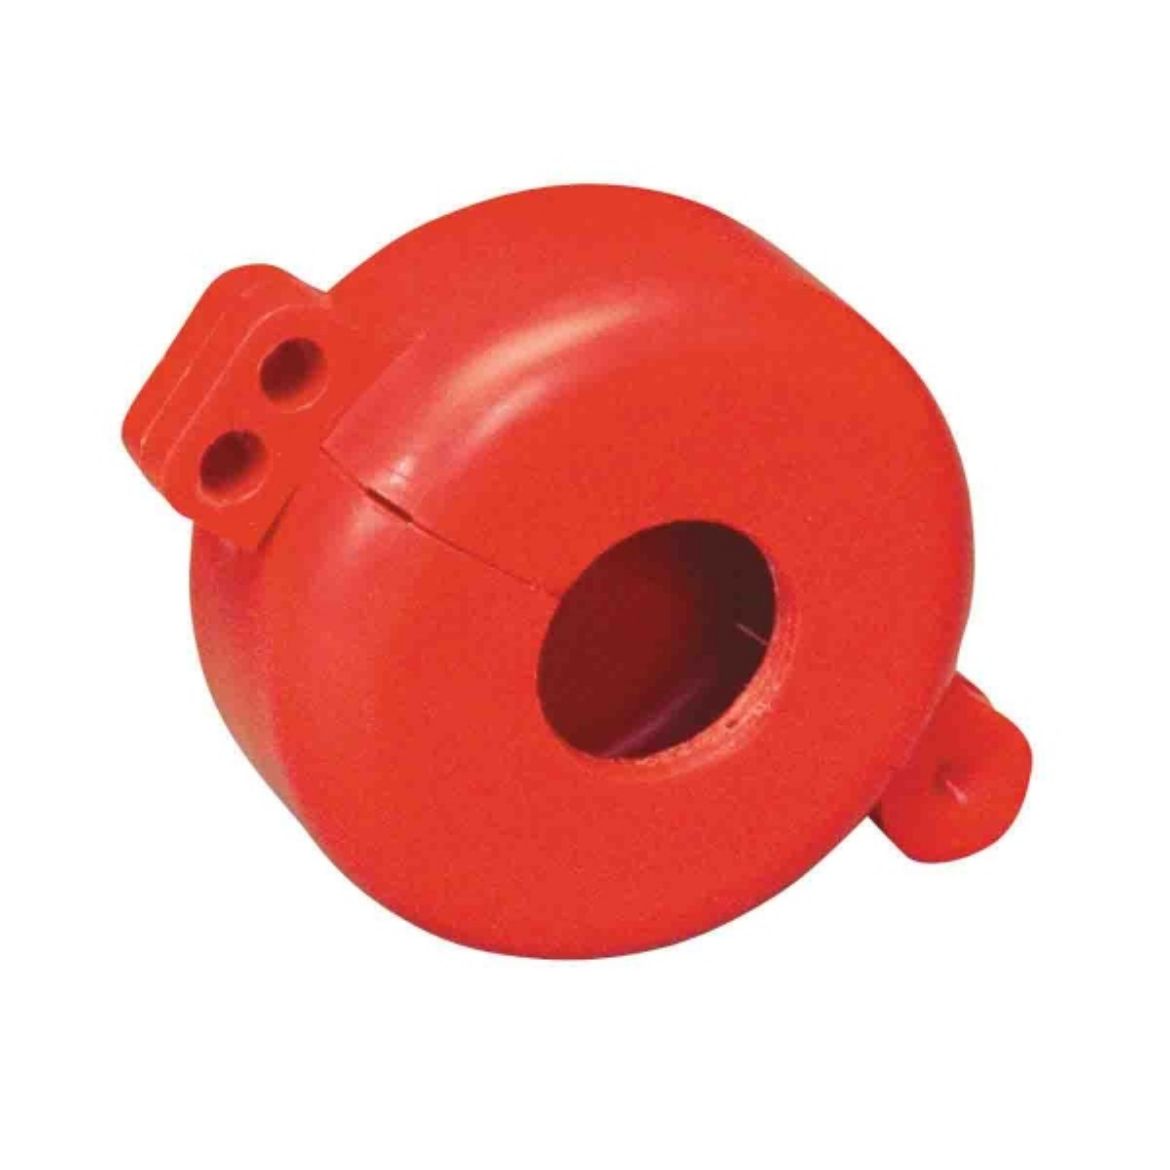 Picture of PRINZING CYLINDER TANK LOCKOUT